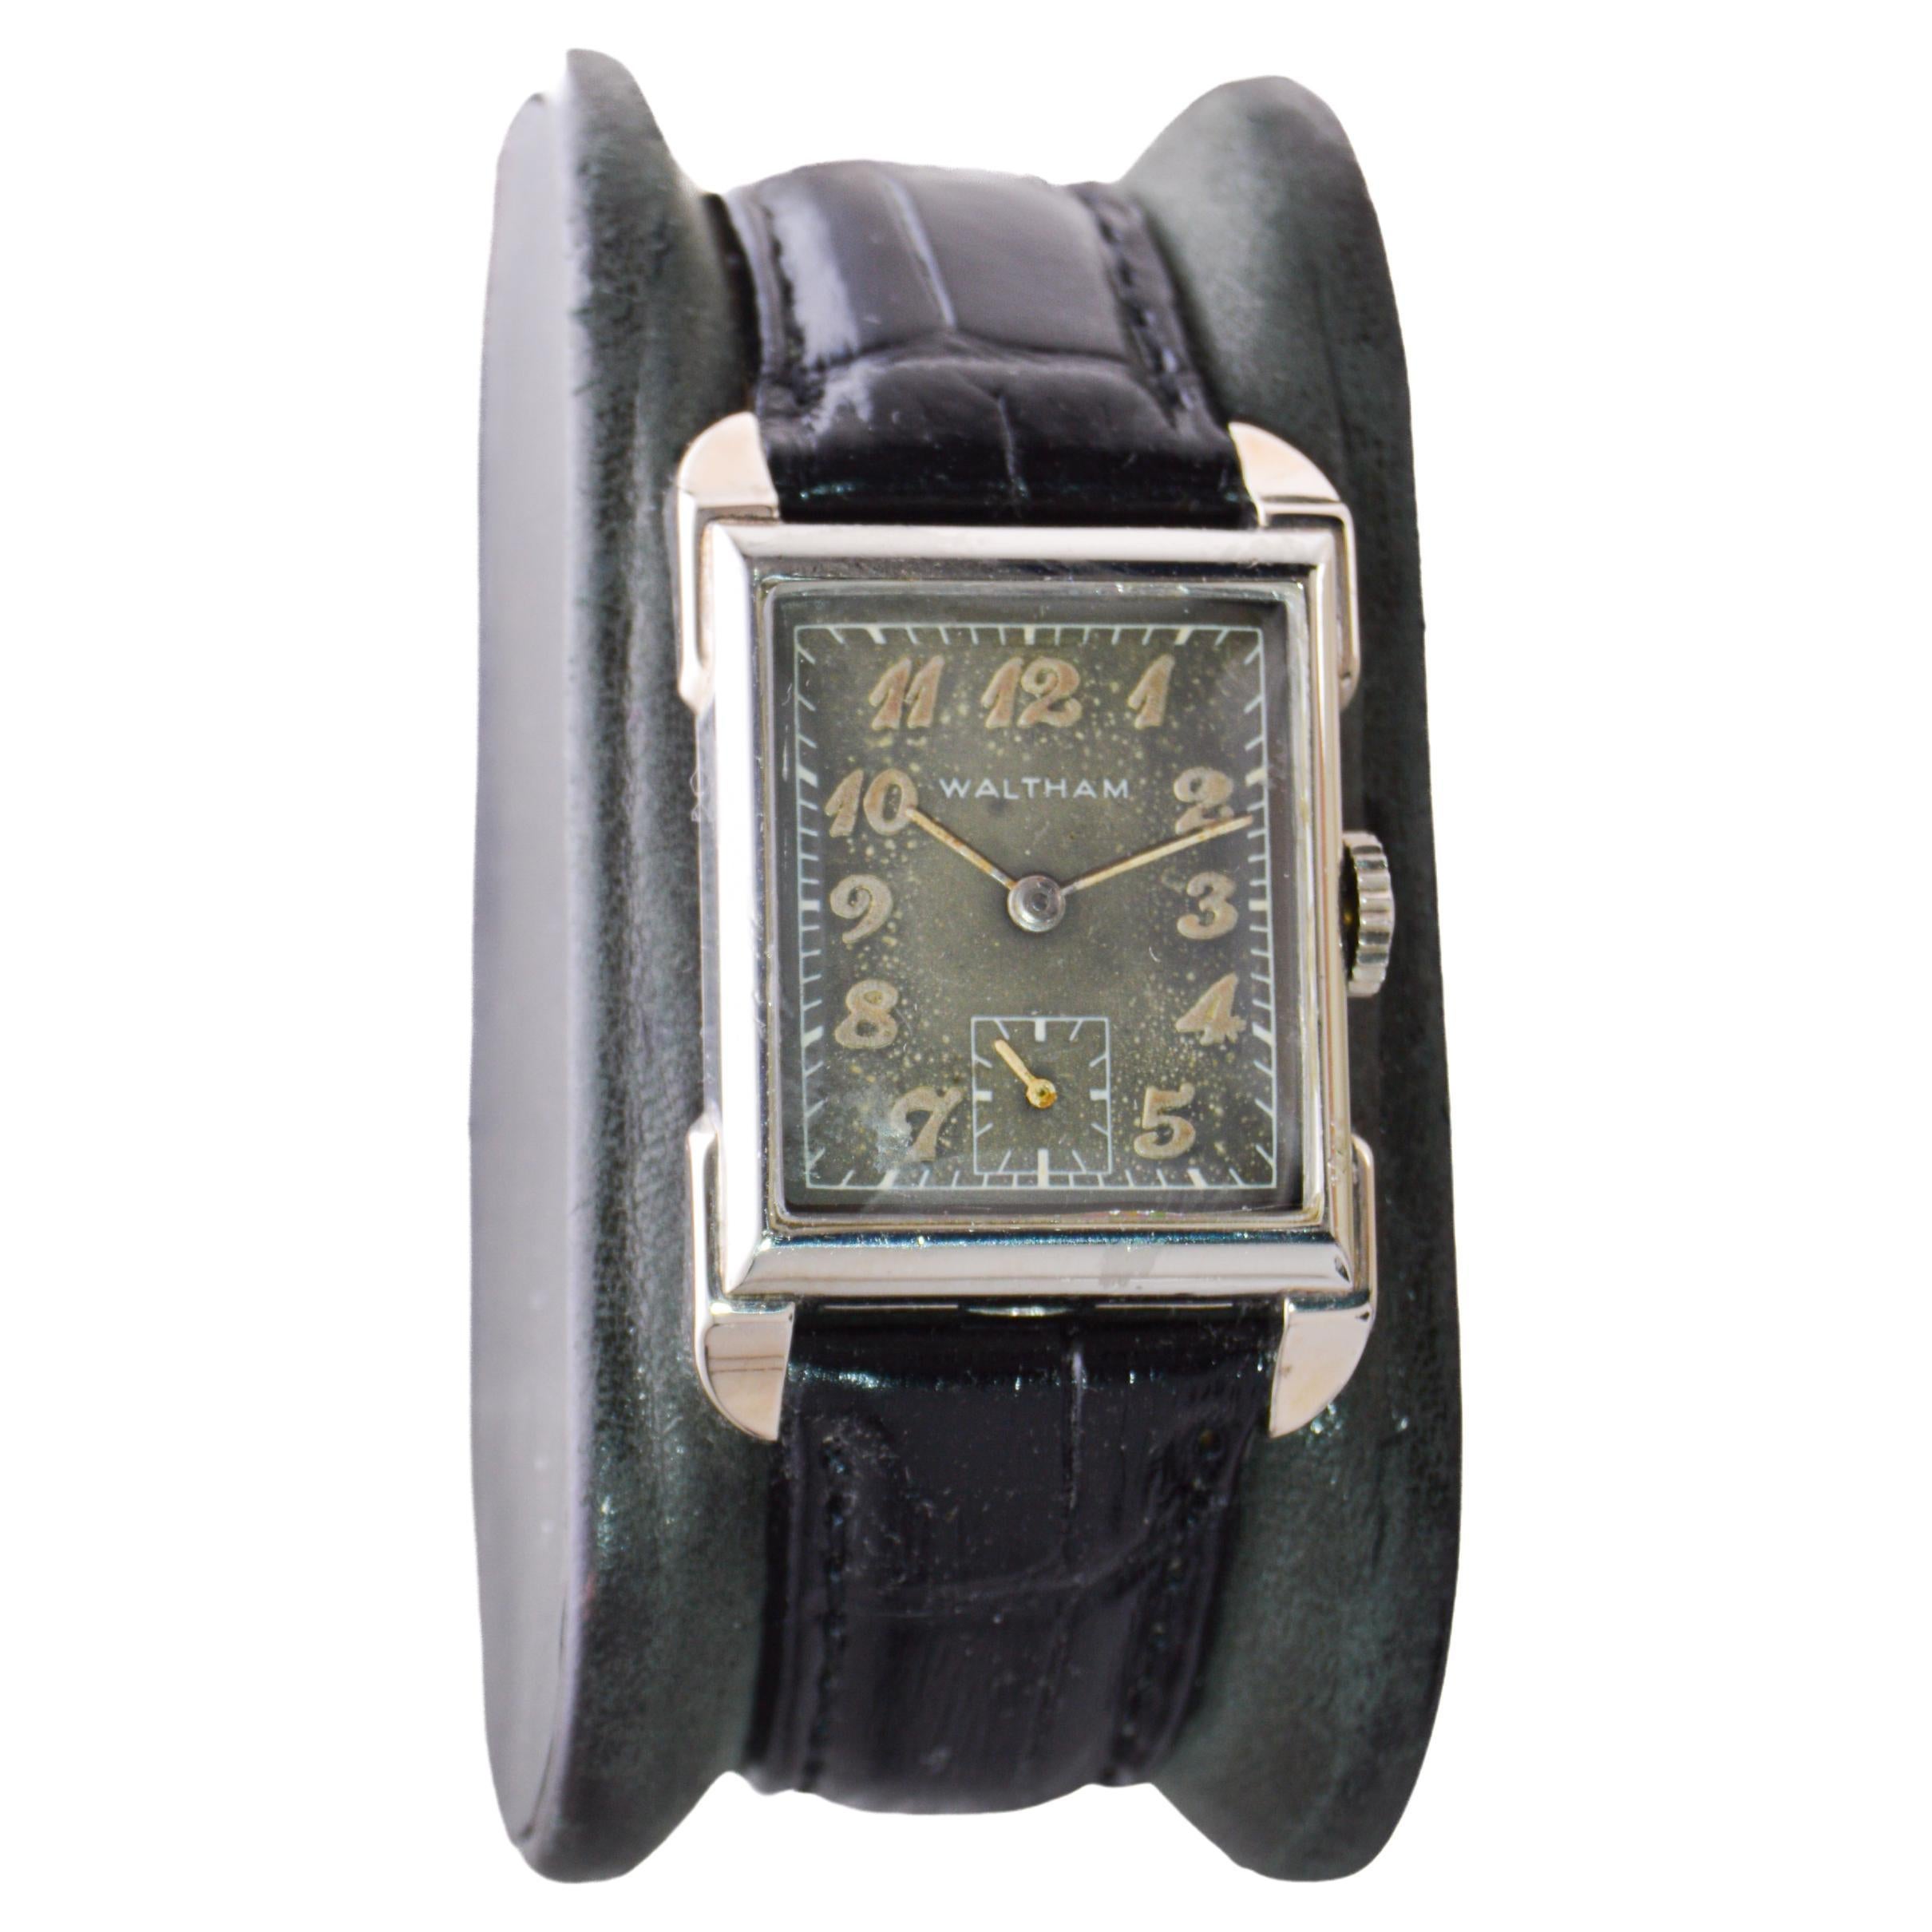 FACTORY / HOUSE: Waltham Watch Company
STYLE / REFERENCE: Art Deco / Tank Style 
METAL / MATERIAL: White Gold Filled
CIRCA / YEAR: 1940's
DIMENSIONS / SIZE: Length 36mm X Width 24mm
MOVEMENT / CALIBER: Manual Winding / 17 Jewel / Caliber 750 B
DIAL